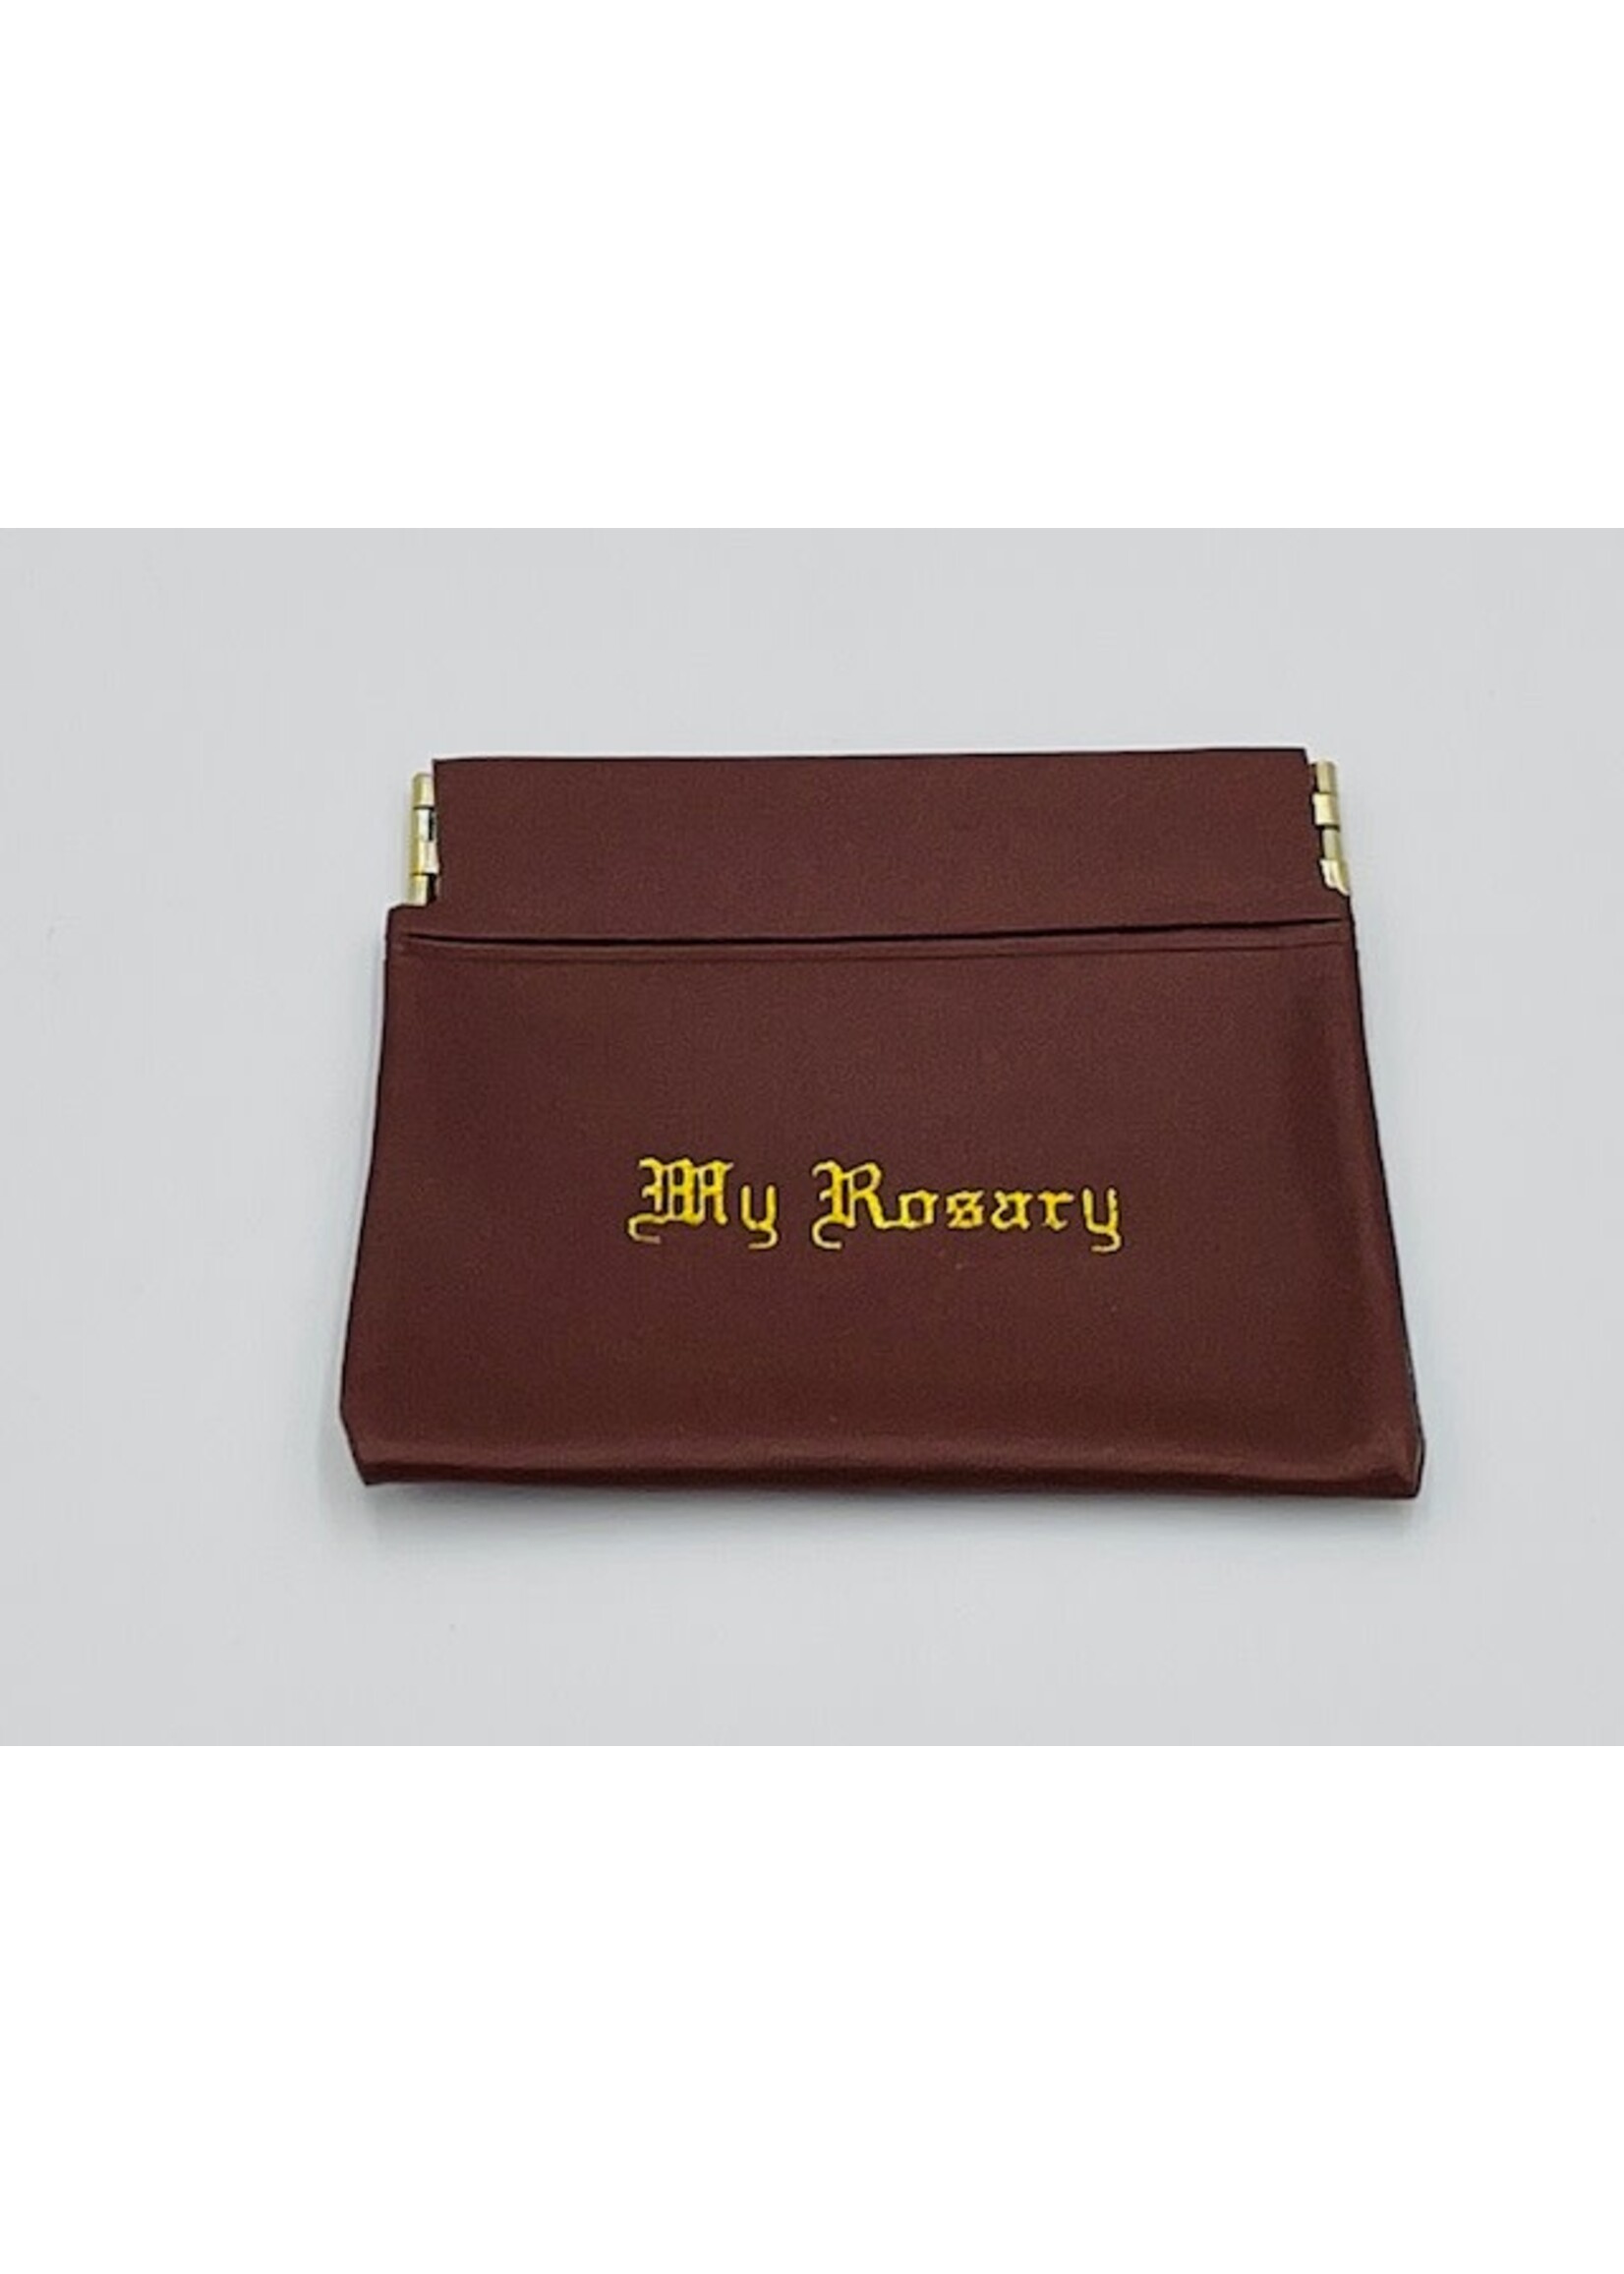 Vinyl "Squeeze" Rosary Case - brown